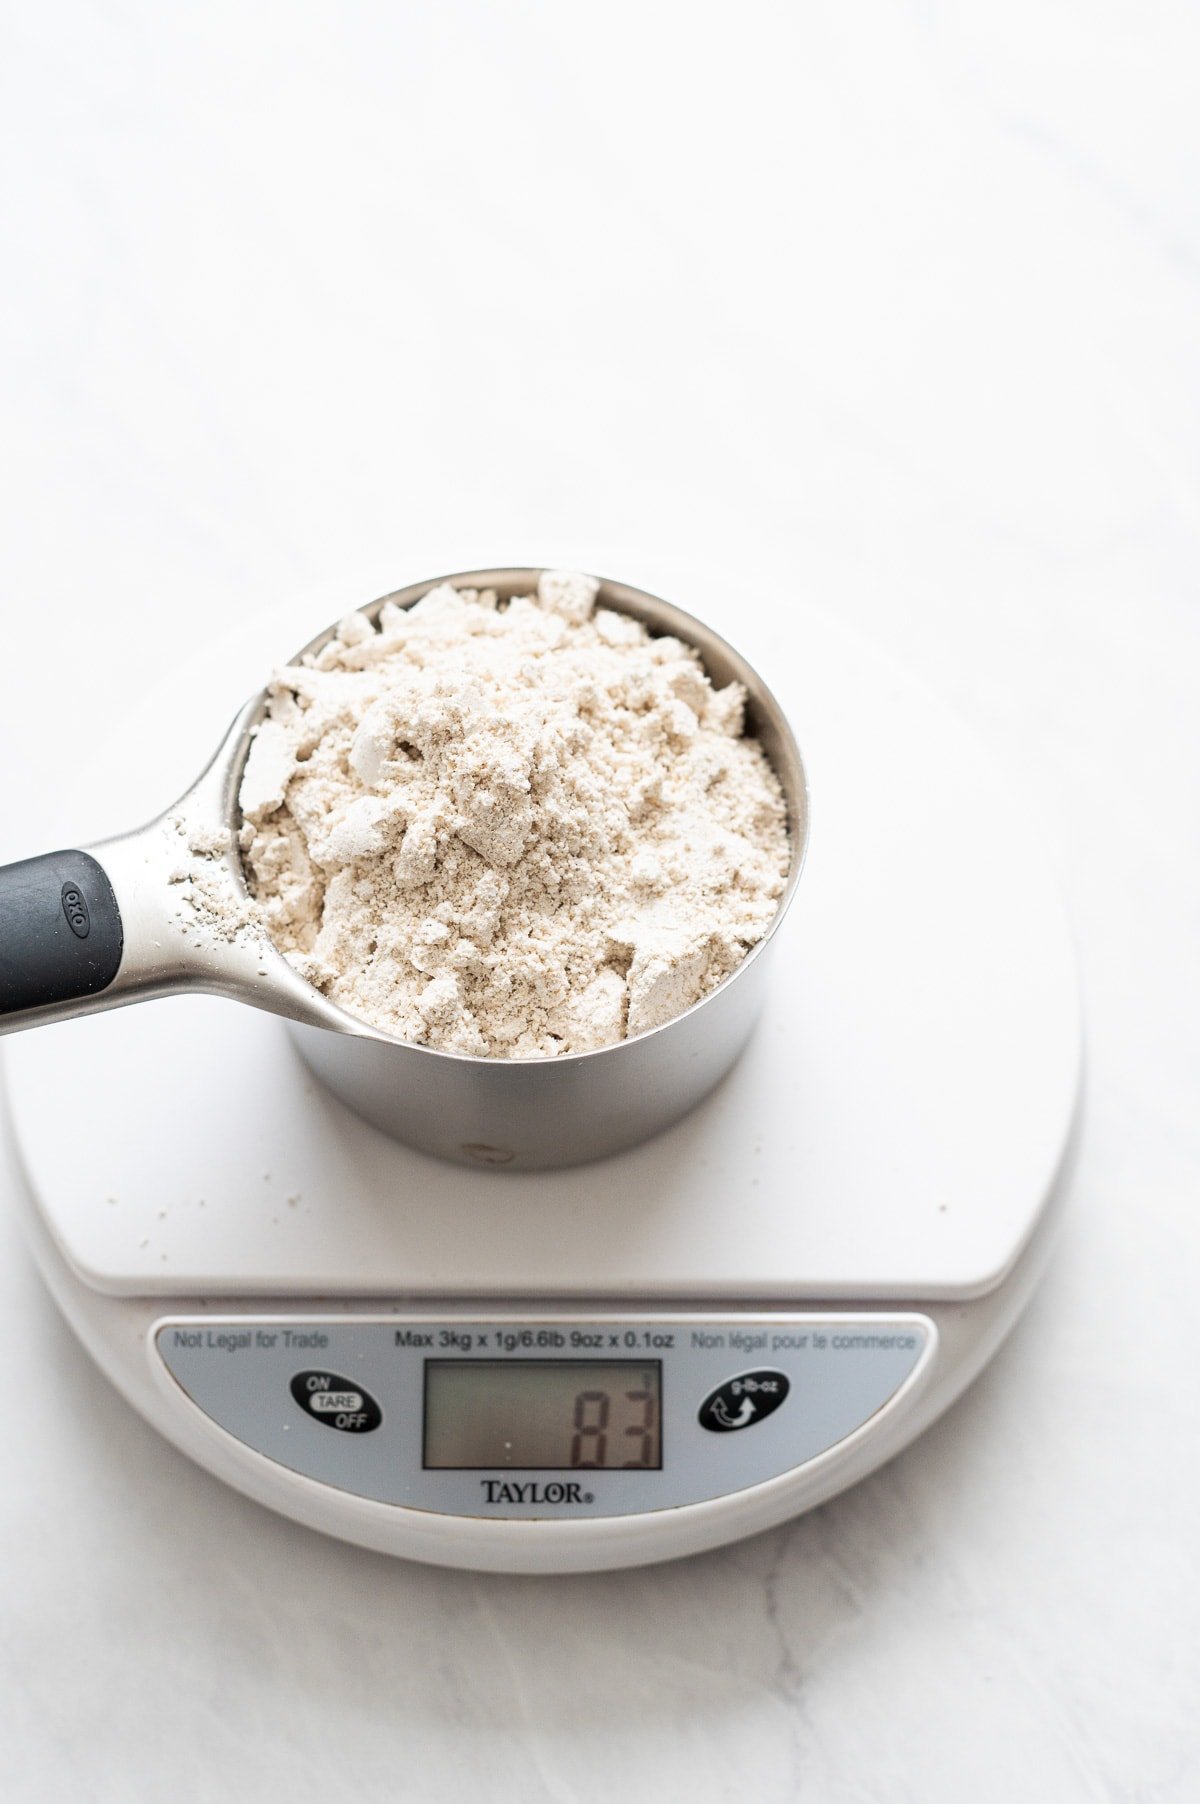 Oats in a measuring cup on a kitchen scale showing 83 grams.